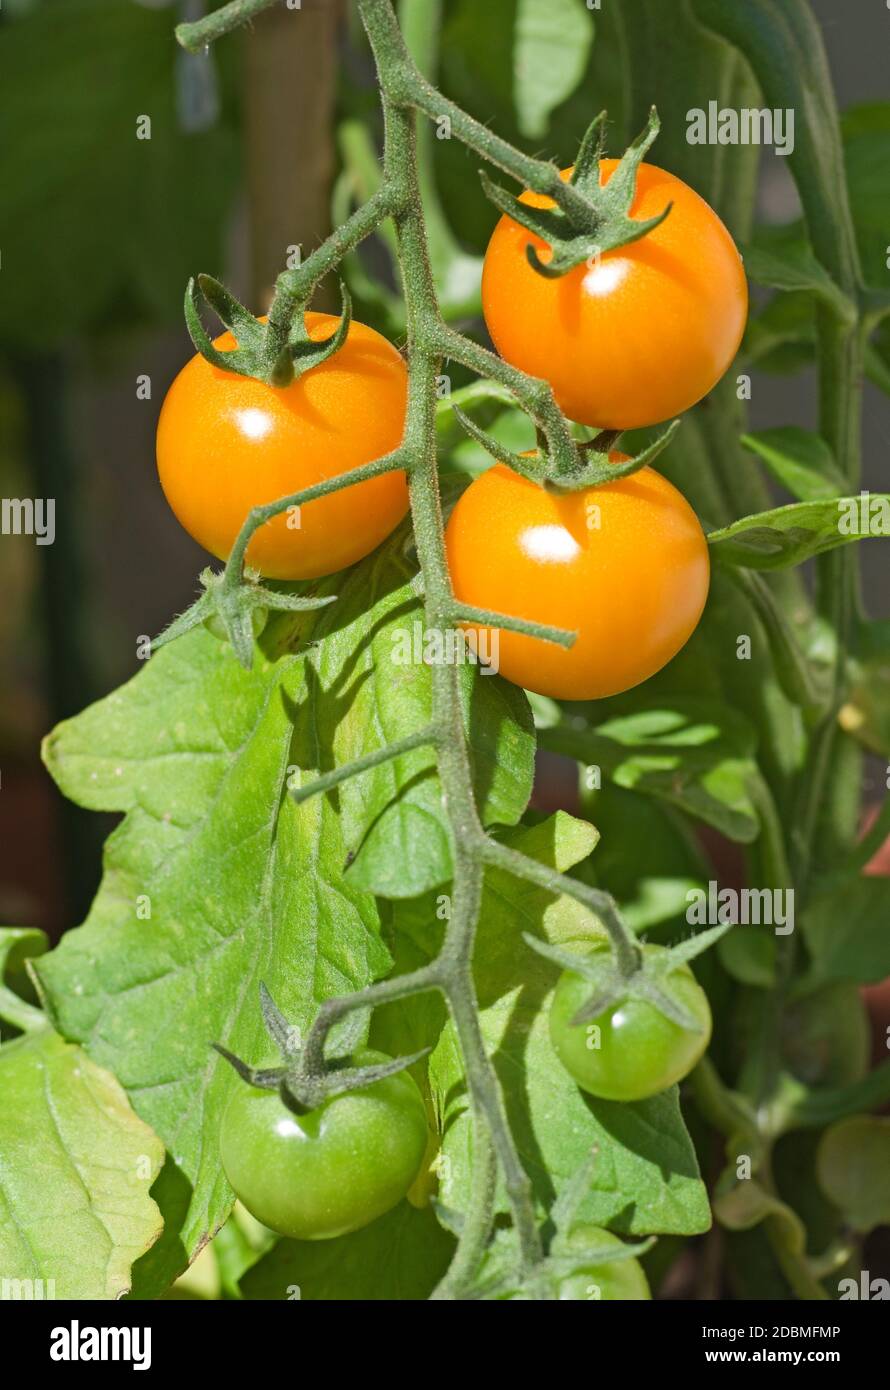 Truss of orange Sungold tomatoes ripening on the vine in summer sunshine in domestic garden, Cumbria, England UK. Stock Photo